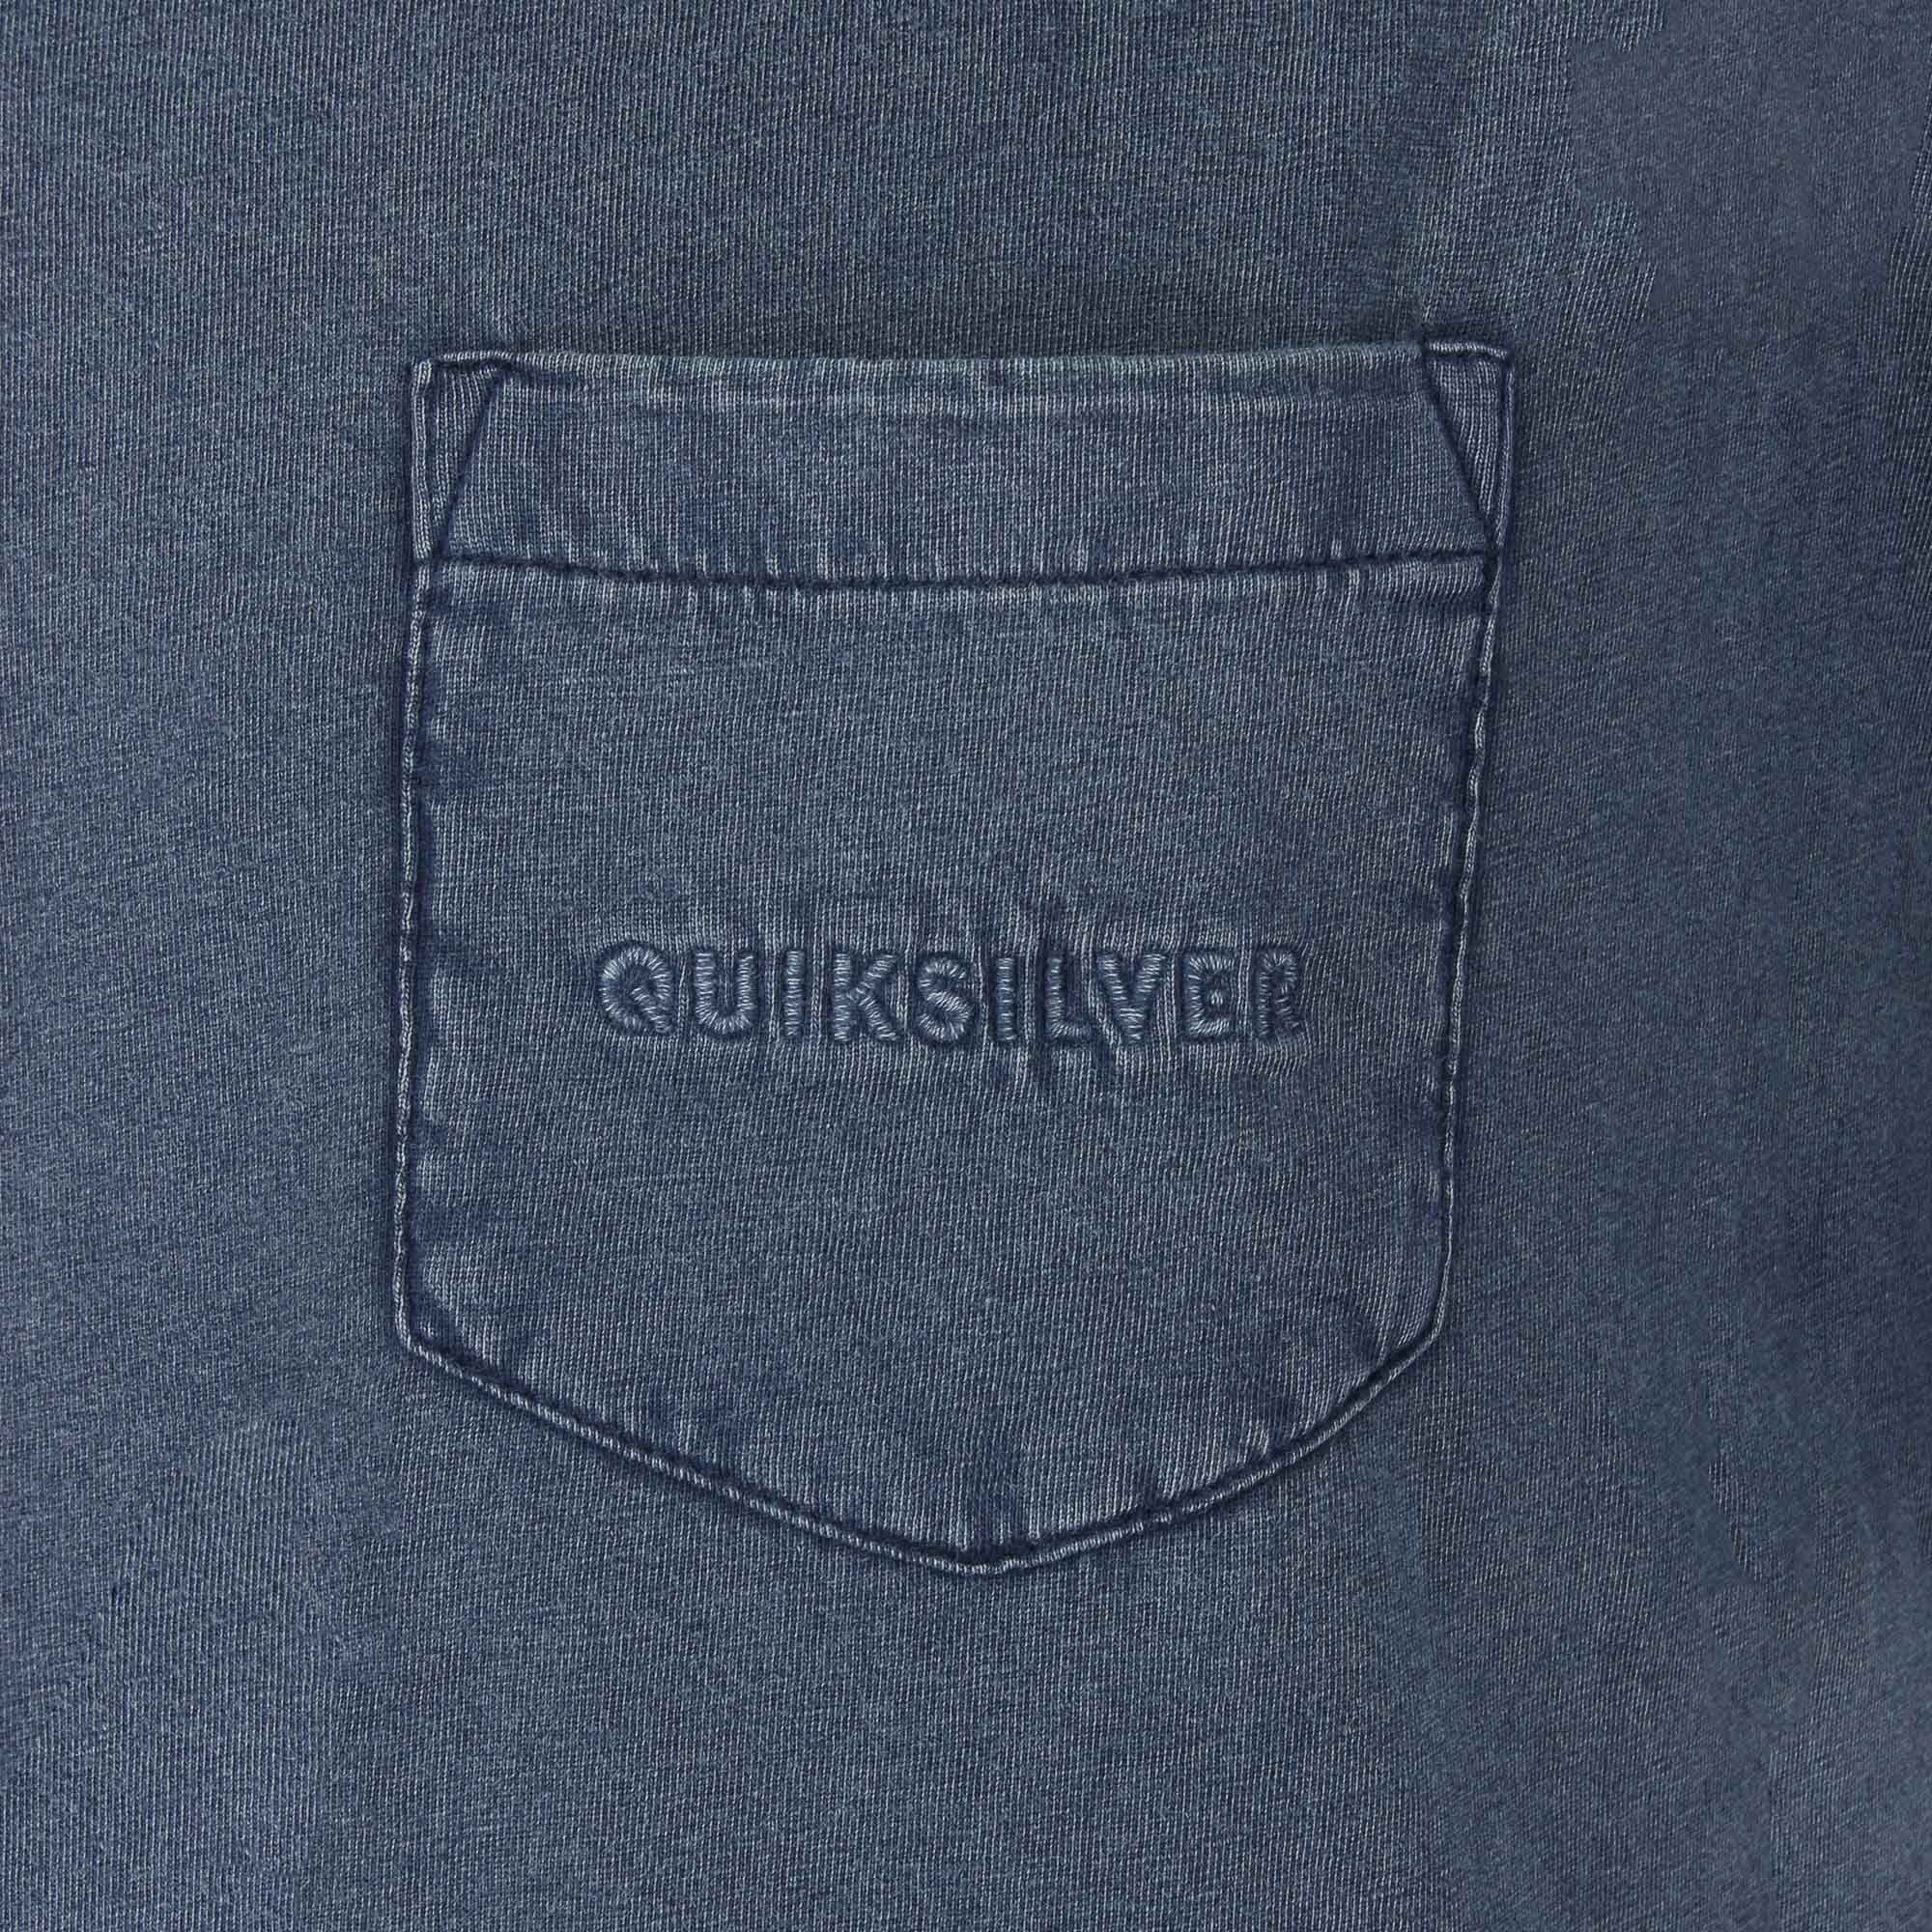 Quiksilver Mens Surf Wash Raw Short Sleeve Knit